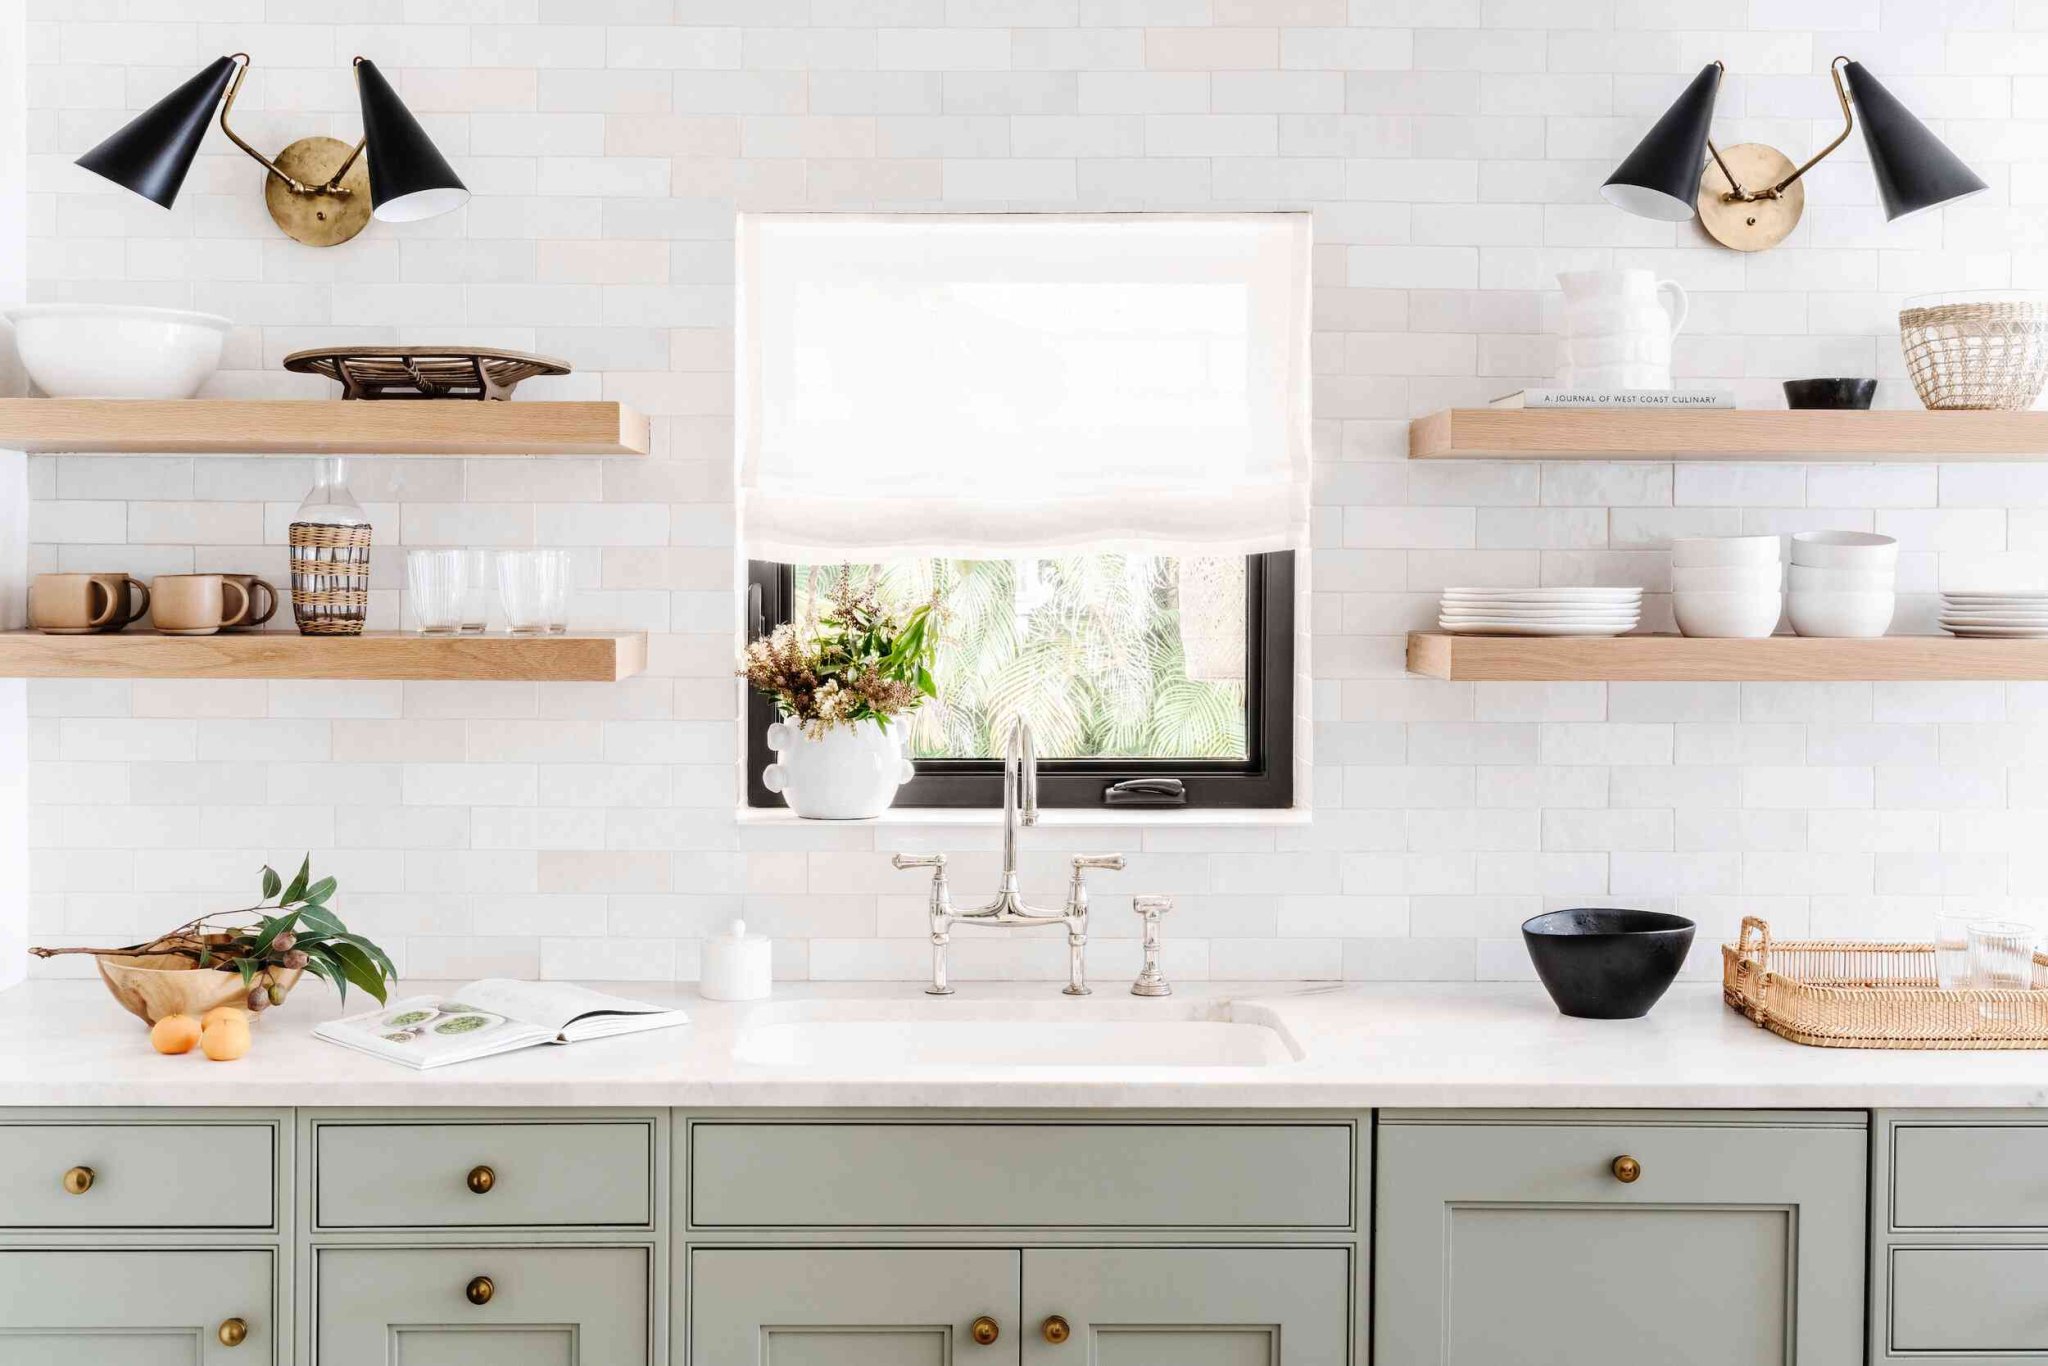 A Professional Organizer Shares Her Secret to a Neat Kitchen